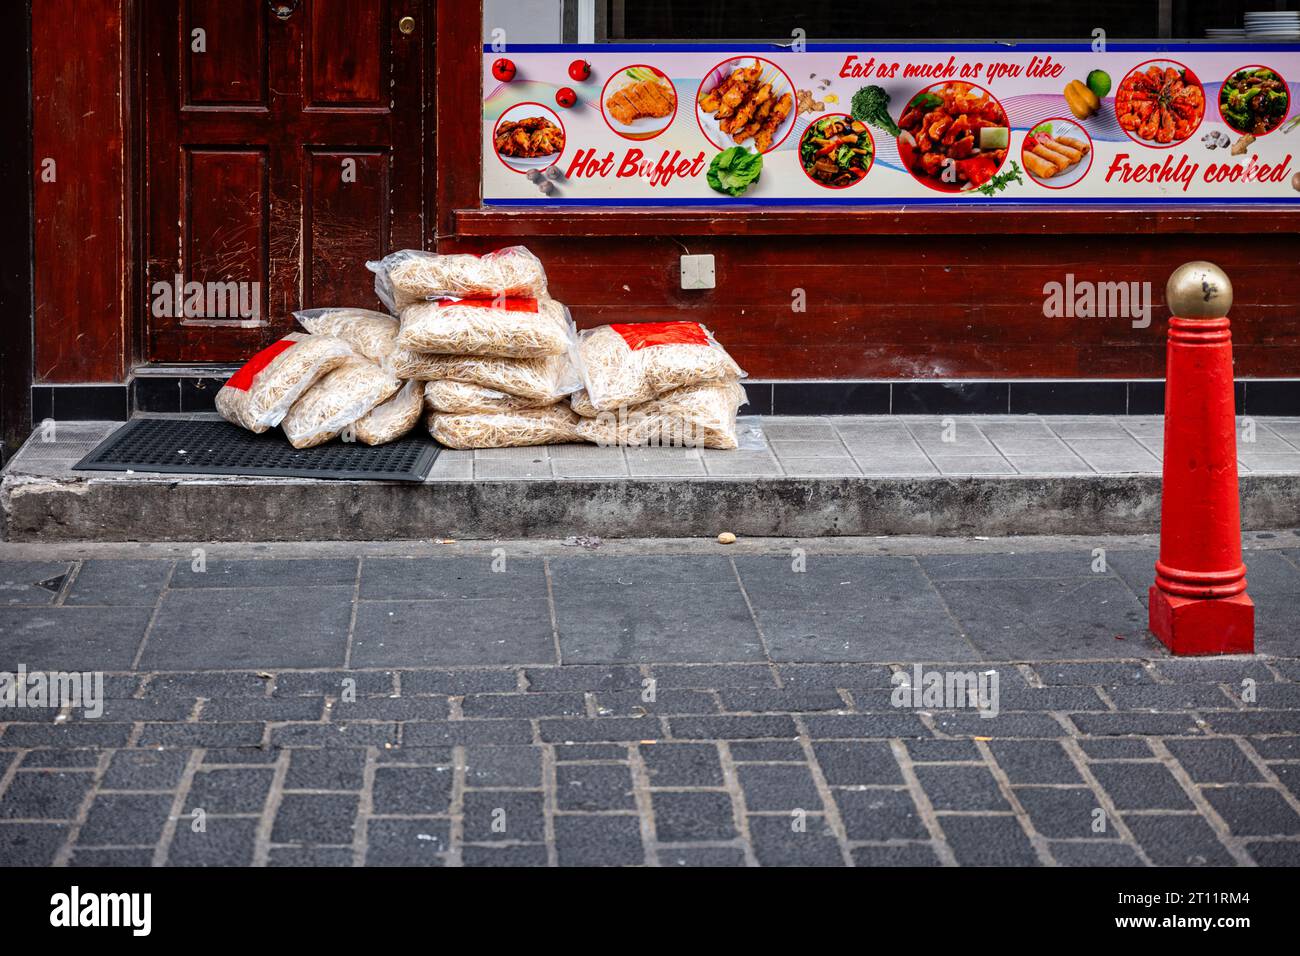 Packages of Noodles, just delivered, lying in front of a restaurant in Chinatown, London, UK. Stock Photo